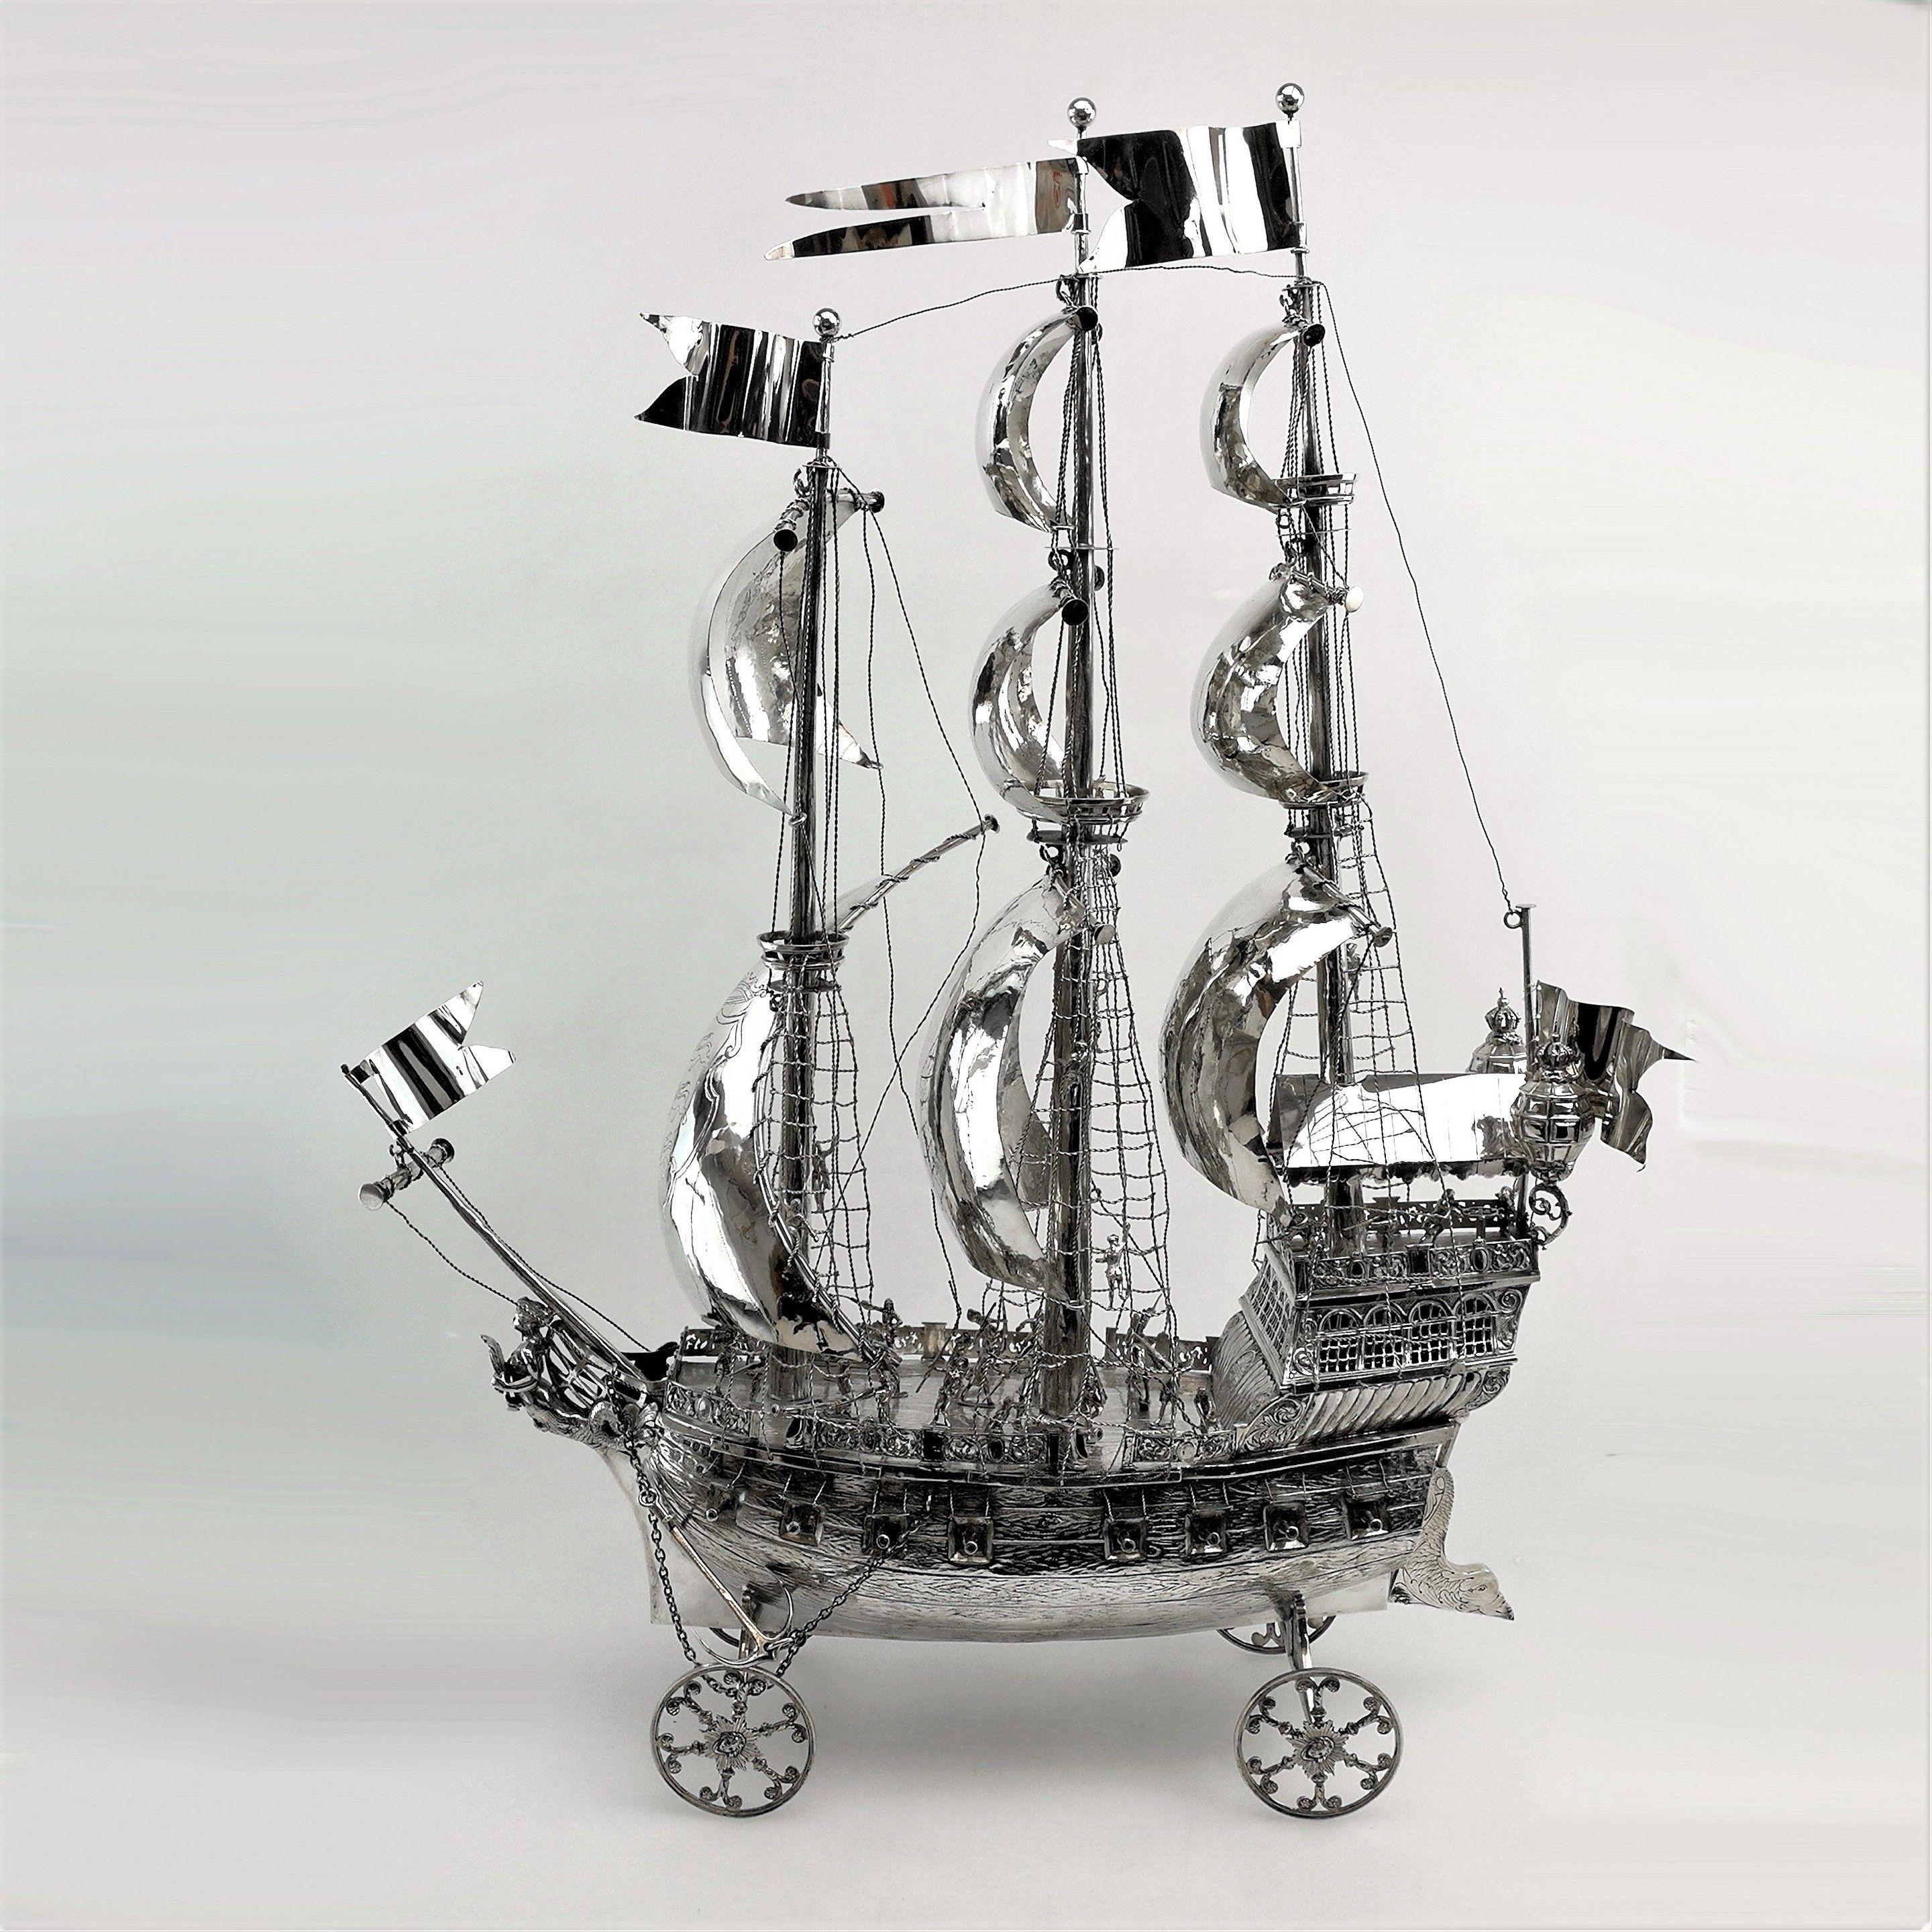 A magnificent Antique solid Silver Nef made by German Silversmith Berthold Muller mirroring the historically traditional style of Nefs. This is a particularly large example of a Nef - a Sailing Boat or Galleon Ship shown in full sail. The Ship is